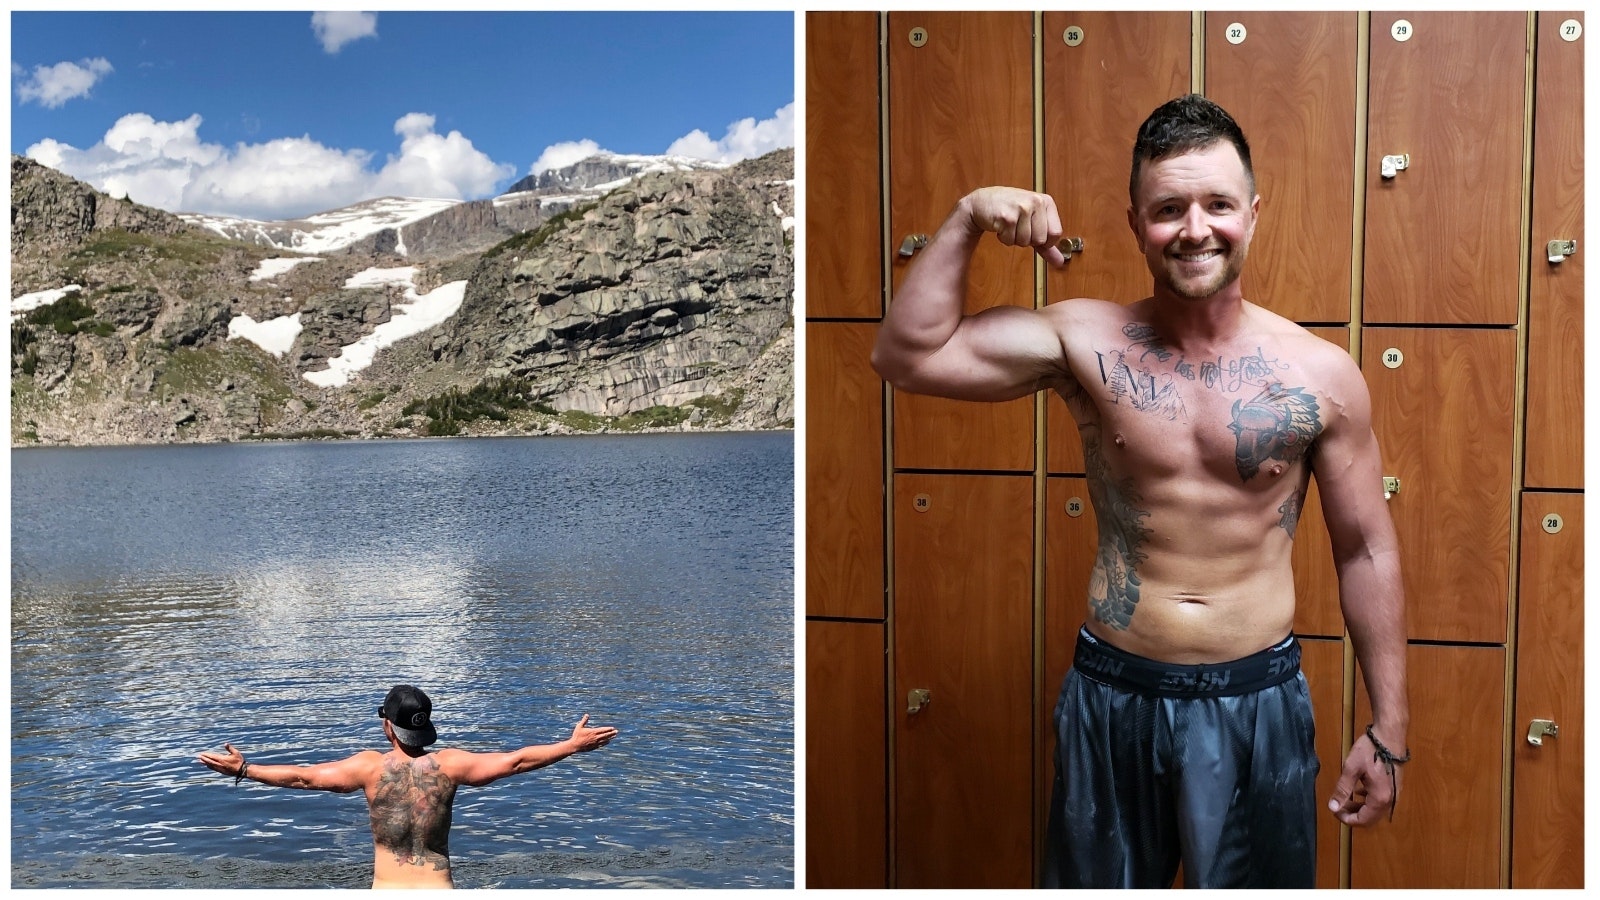 Left: Celebrating life at Hidden Falls in the Big Horns: Right: Taken a year after Nathan Kissack was put on maintenance chemo. Kissack told Cowboy State Daily he just made up a competition for himself, to see what kind of dramatic physical change he could make happen with his body after being told by doctors not to work out.